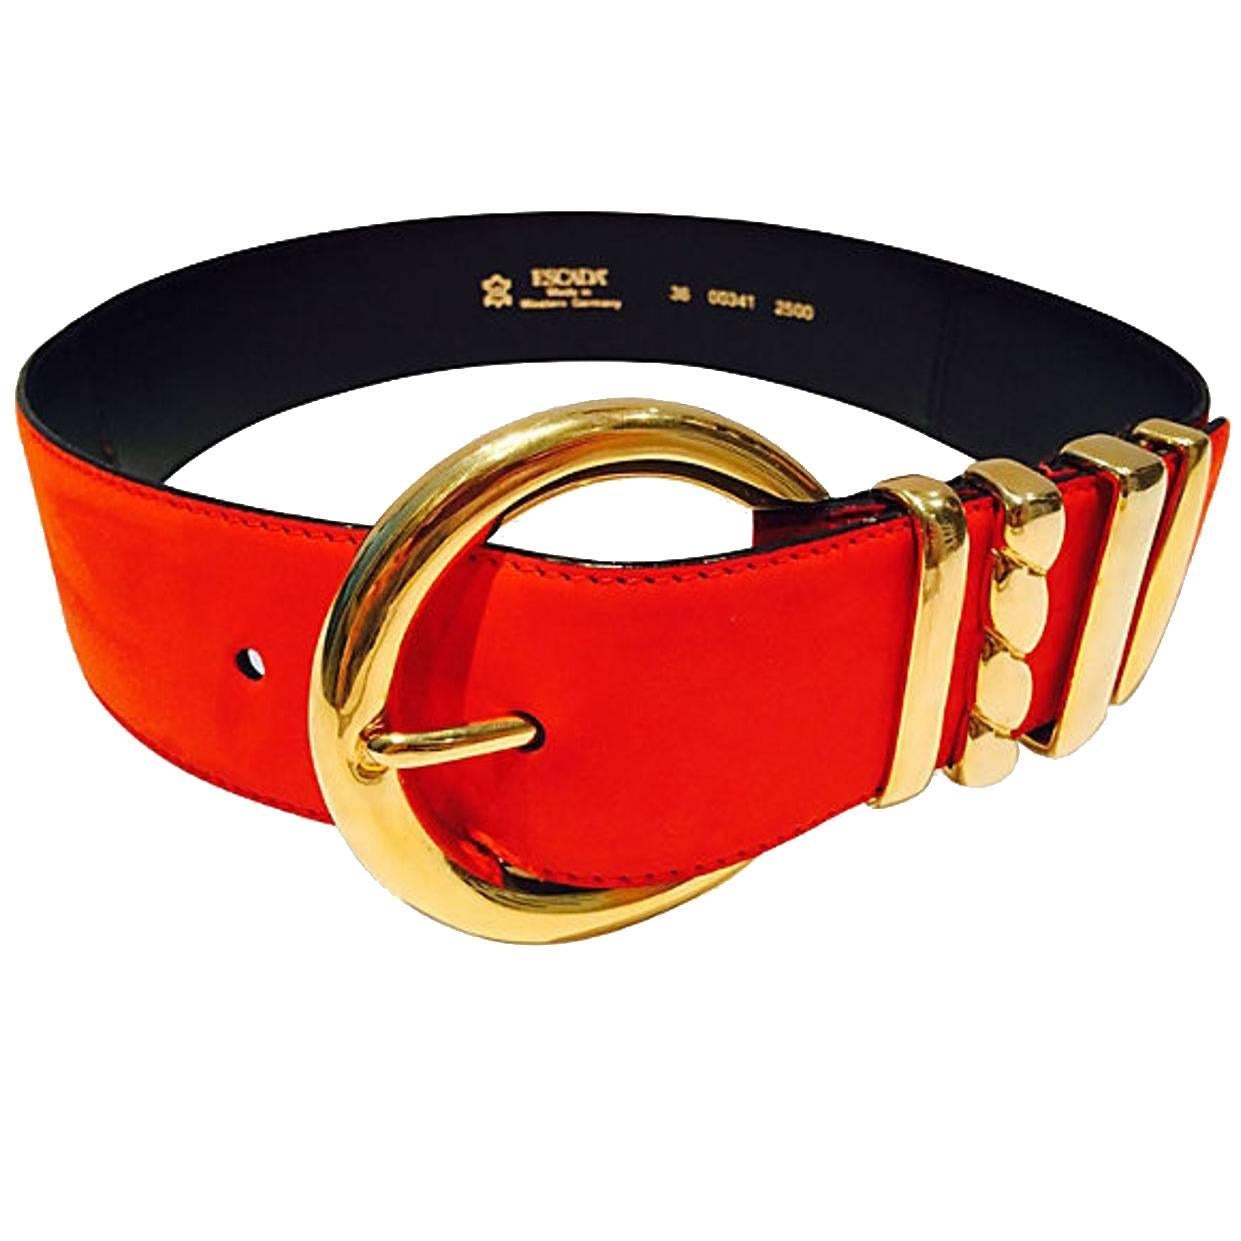 1980s Escada Suede Two-Tone Color Block Chunky Belt For Sale